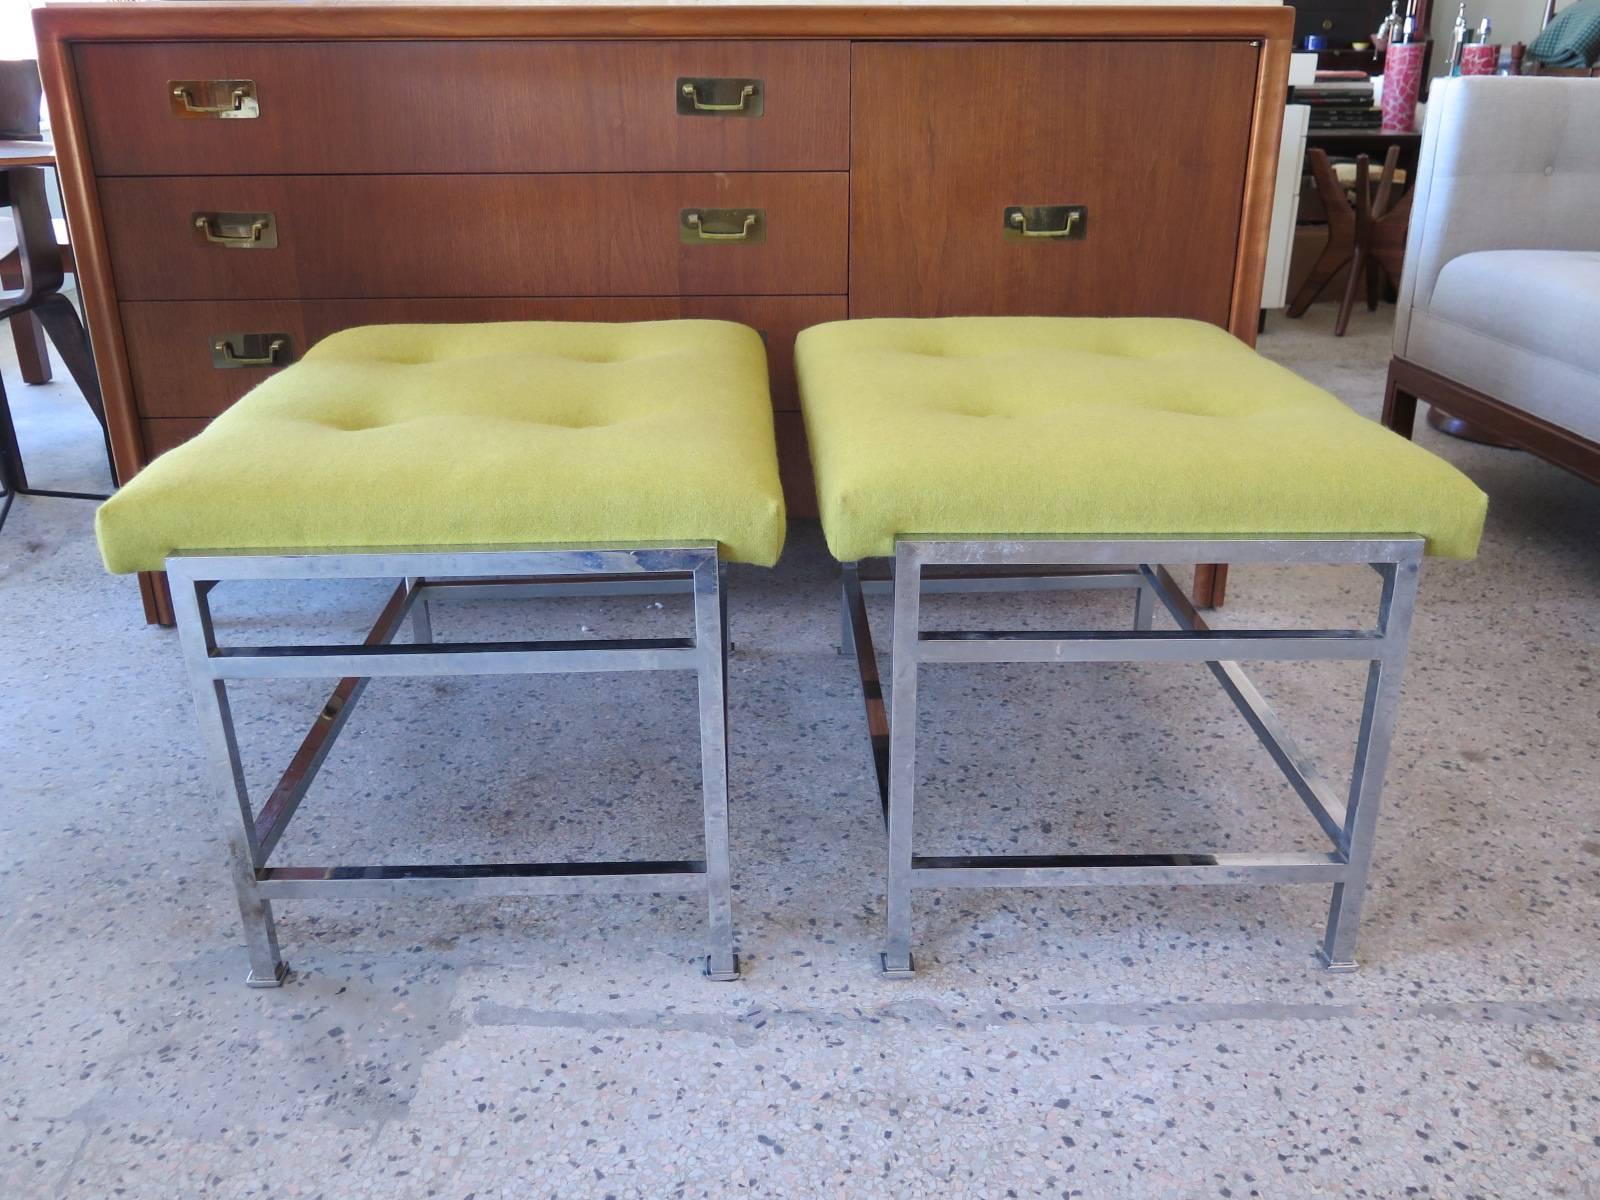 A Classic Edward Wormley for Dunbar upholstered benches, model # 5428. Nickeled brass frames, upholstered seats.